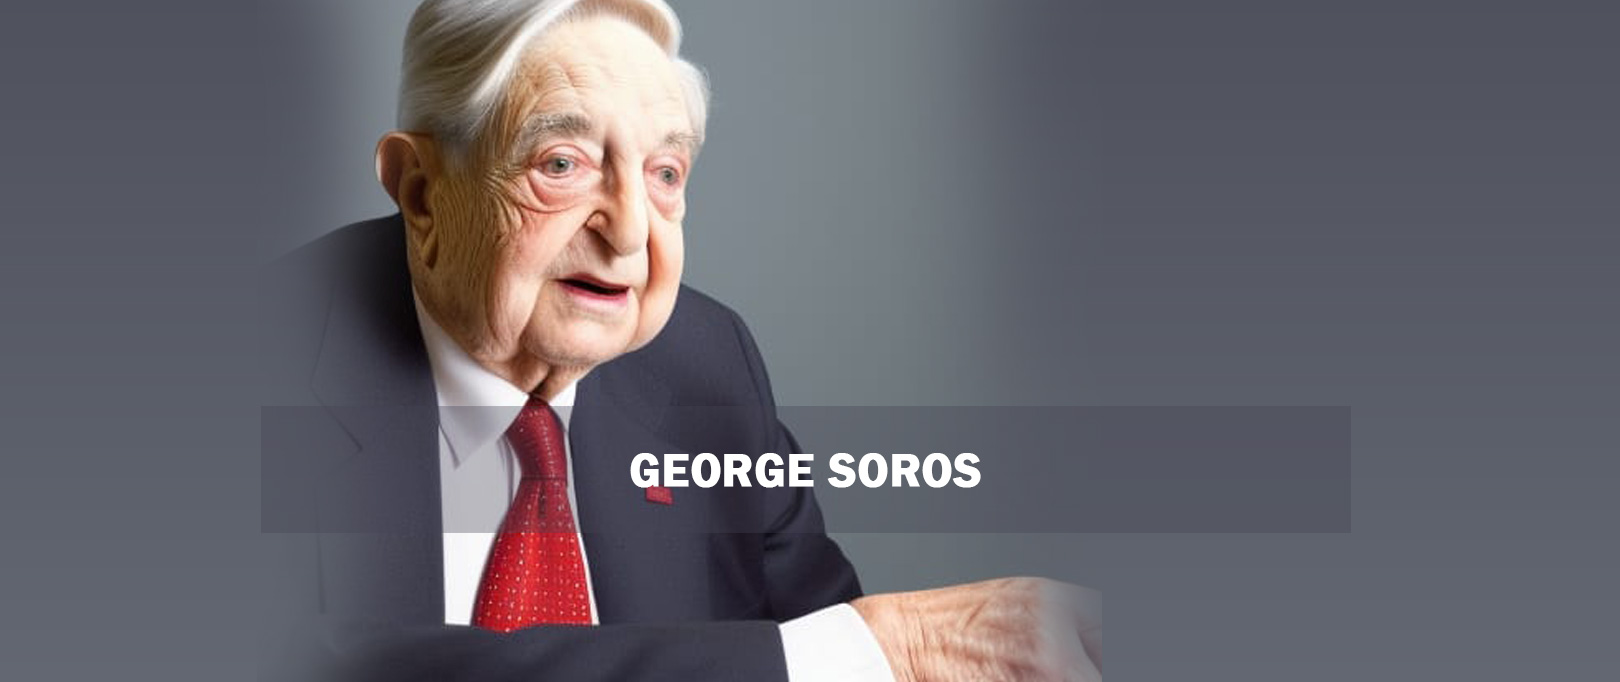 George Soros is One of the Famous Forex Traders